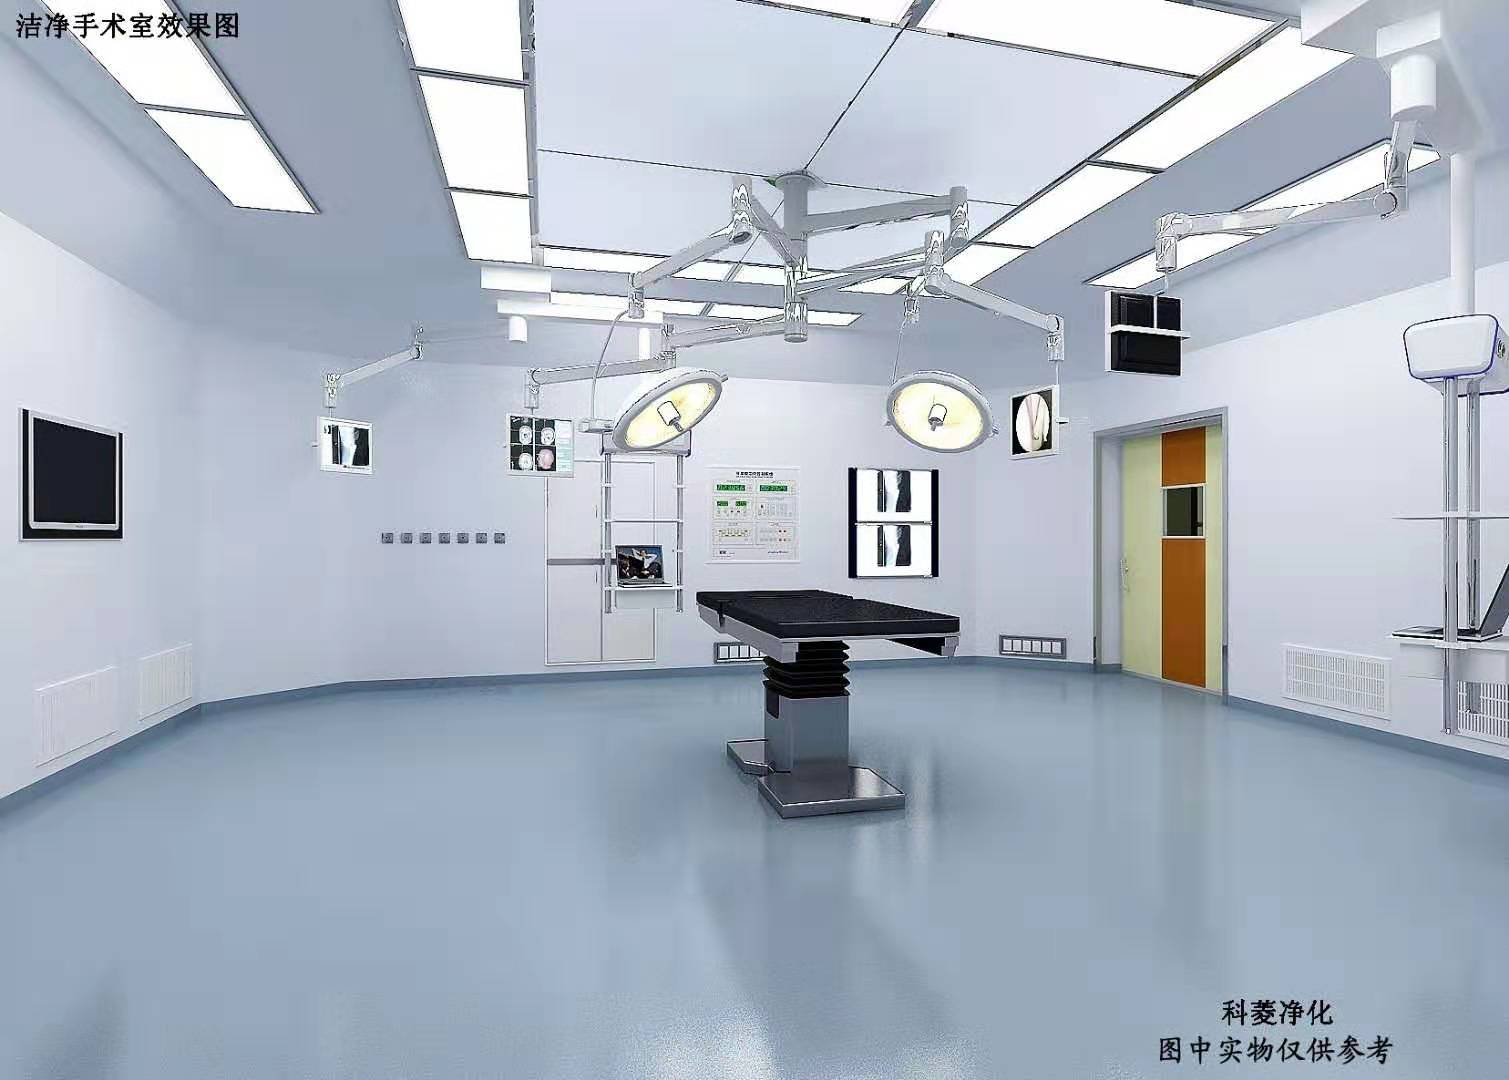 Laminar flow purification system in operating room